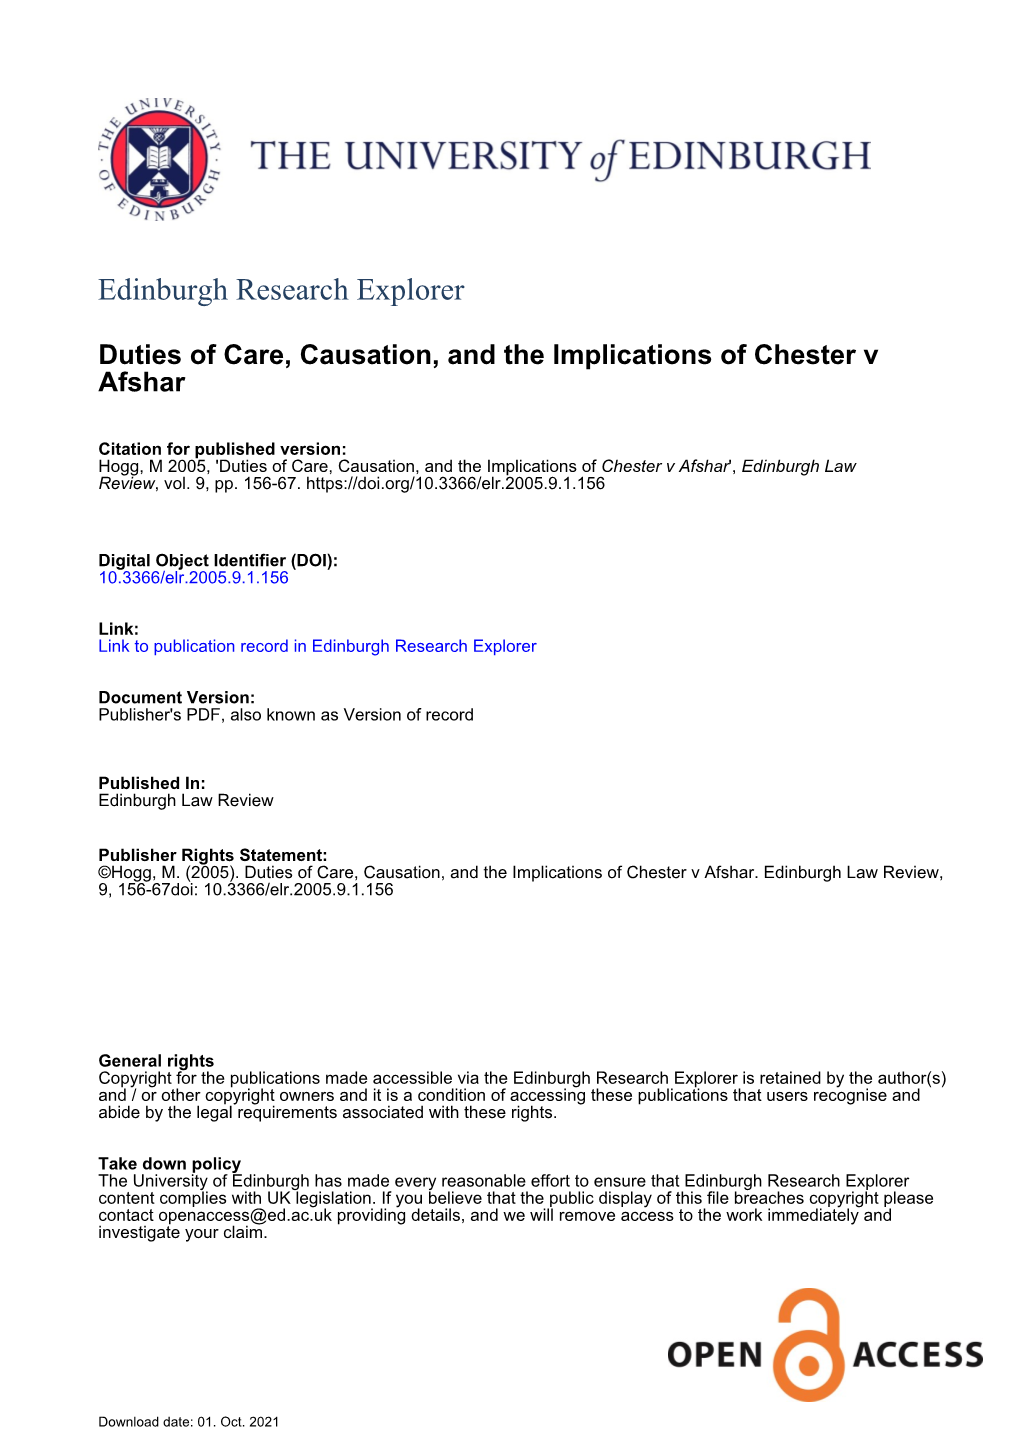 Duties of Care, Causation, and the Implications of Chester V Afshar', Edinburgh Law Review, Vol